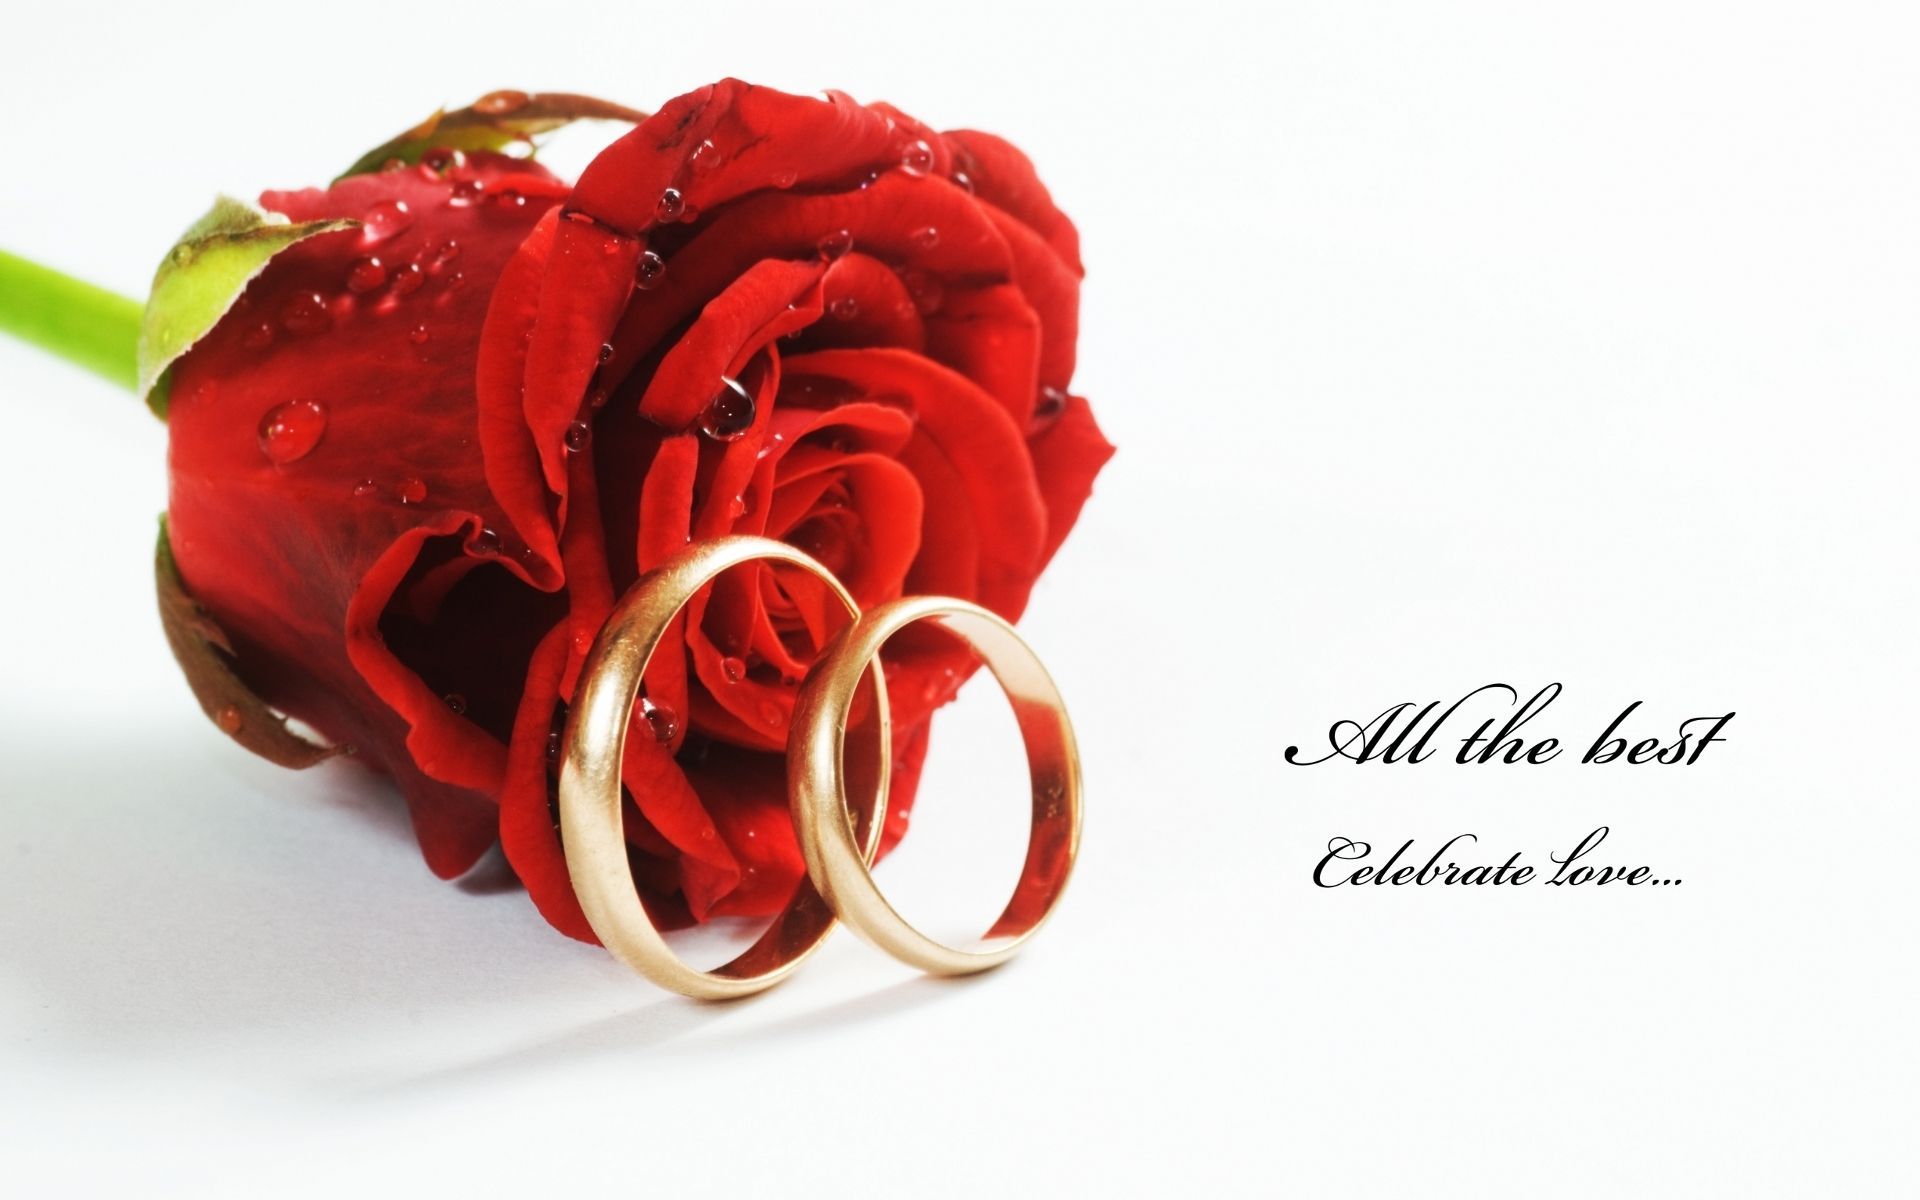 Nice Red Roses With Rings Hd Free Wallpaper. Rose Wallpaper, Red